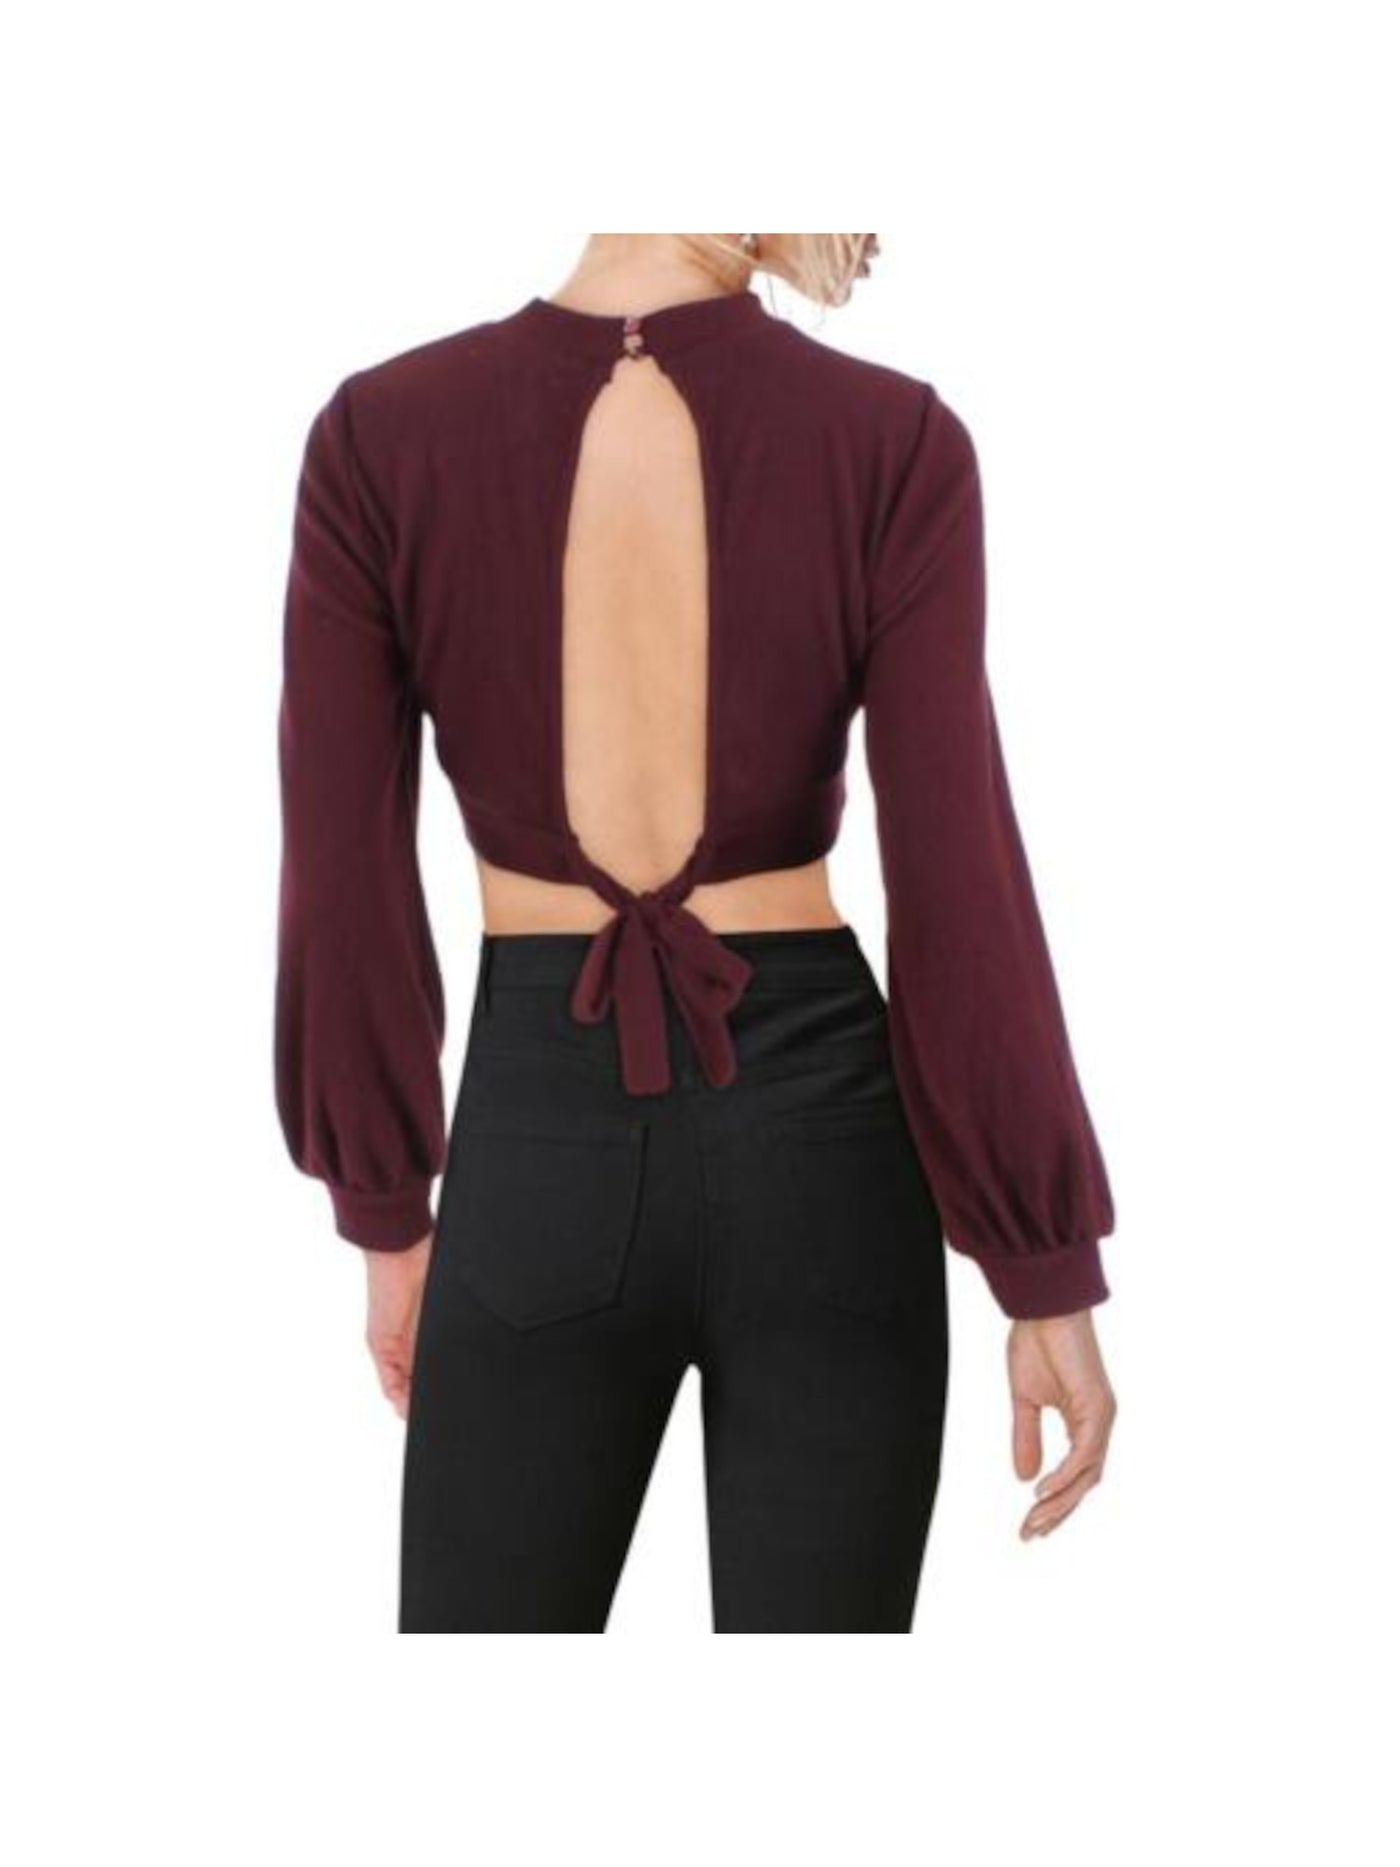 ALMOST FAMOUS Womens Burgundy Ribbed Cut Out Button Neck Open Tie Back Balloon Sleeve Mock Neck Crop Top Sweater Juniors L